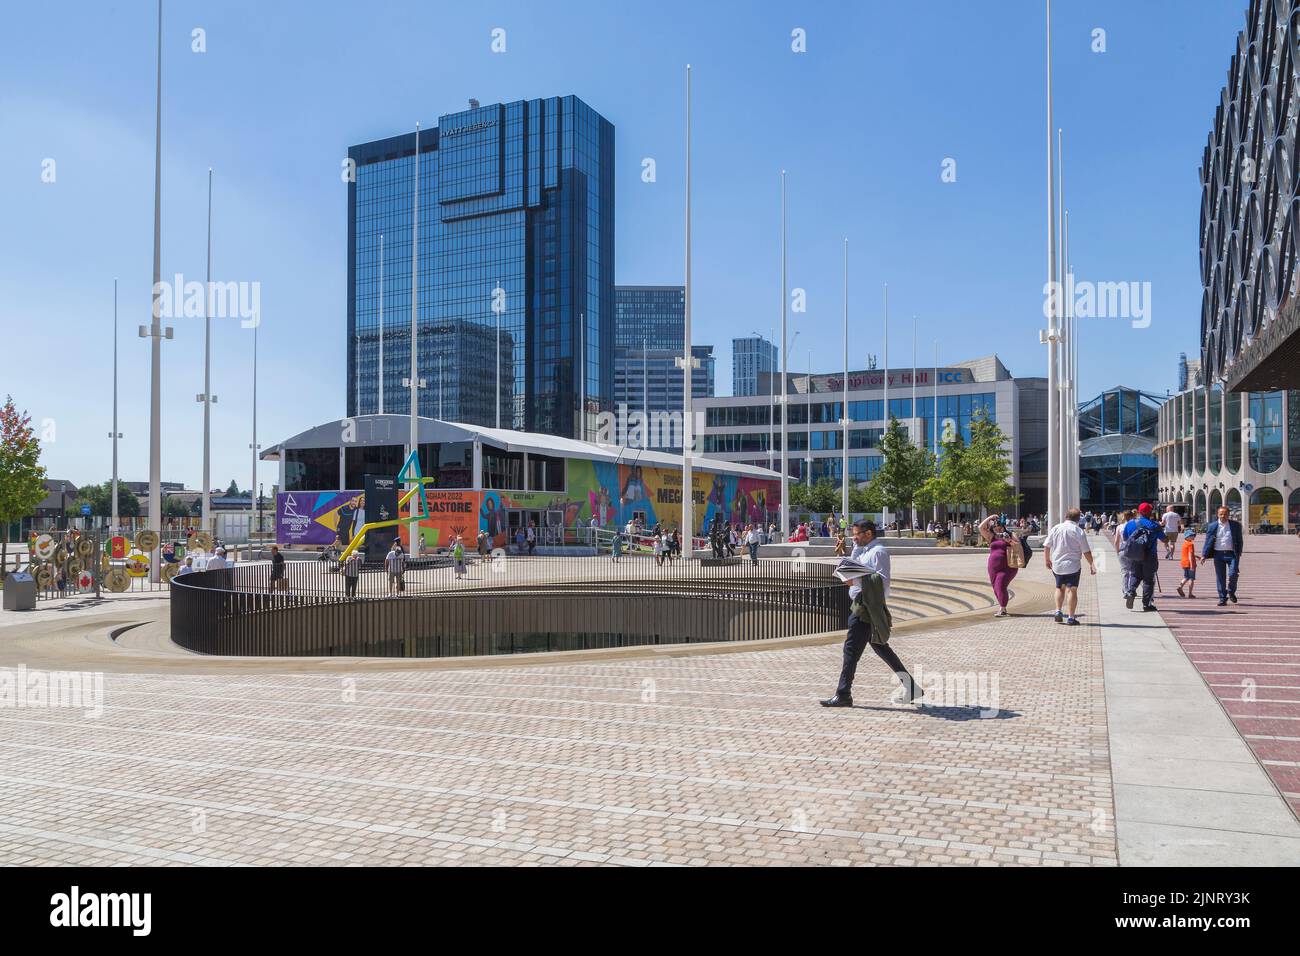 The Official Megastore for Birmingham 2022 Commonwealth Games adds a splash of colour to Centenary Square, as locals and tourists go about there day. Stock Photo